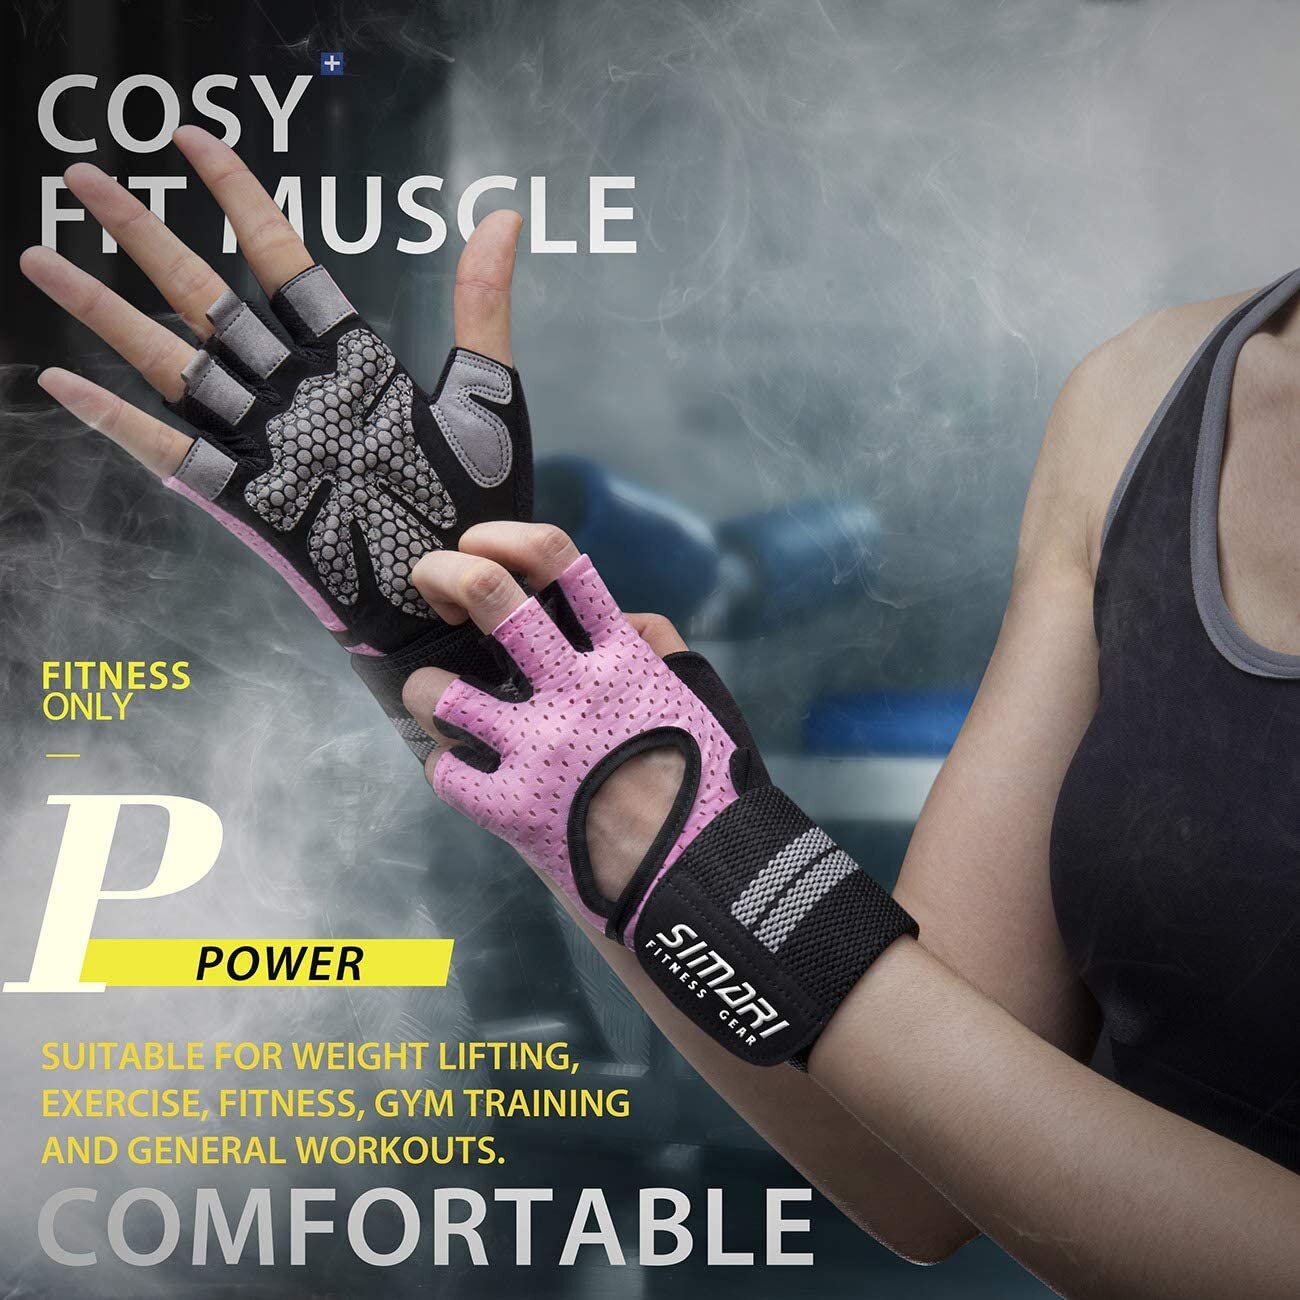 SIMARI Workout Gloves Men Women Full Finger Weight Lifting Gloves with Wrist Support for Gym Exercise Fitness Training Lifts Made of Microfiber and Spandex...